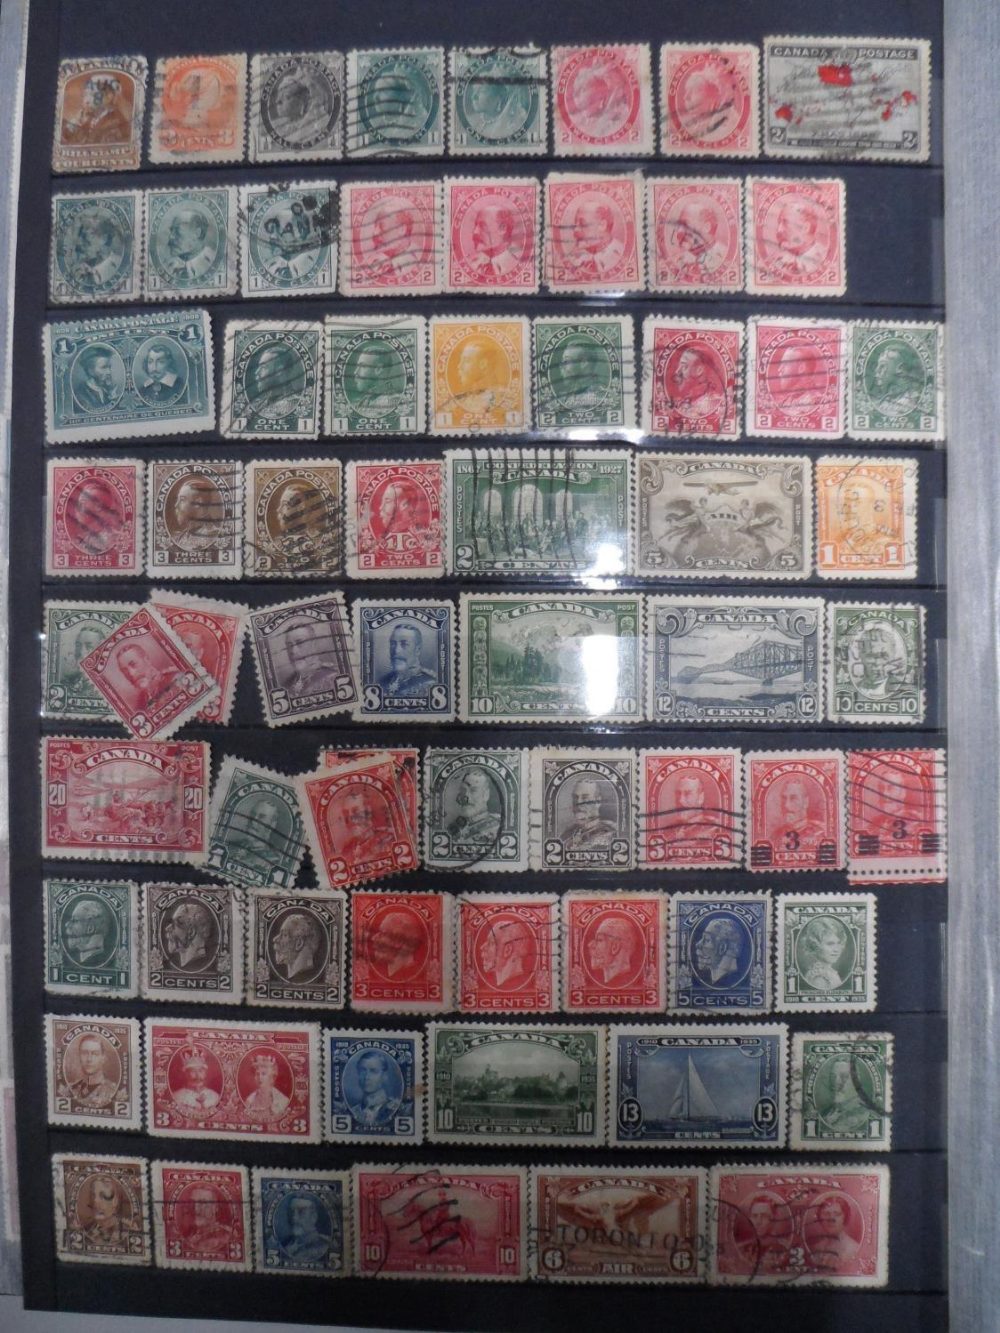 3 albums of world stamps to include Canada QV-QEII, early Greece and other countries as well as used - Image 2 of 9